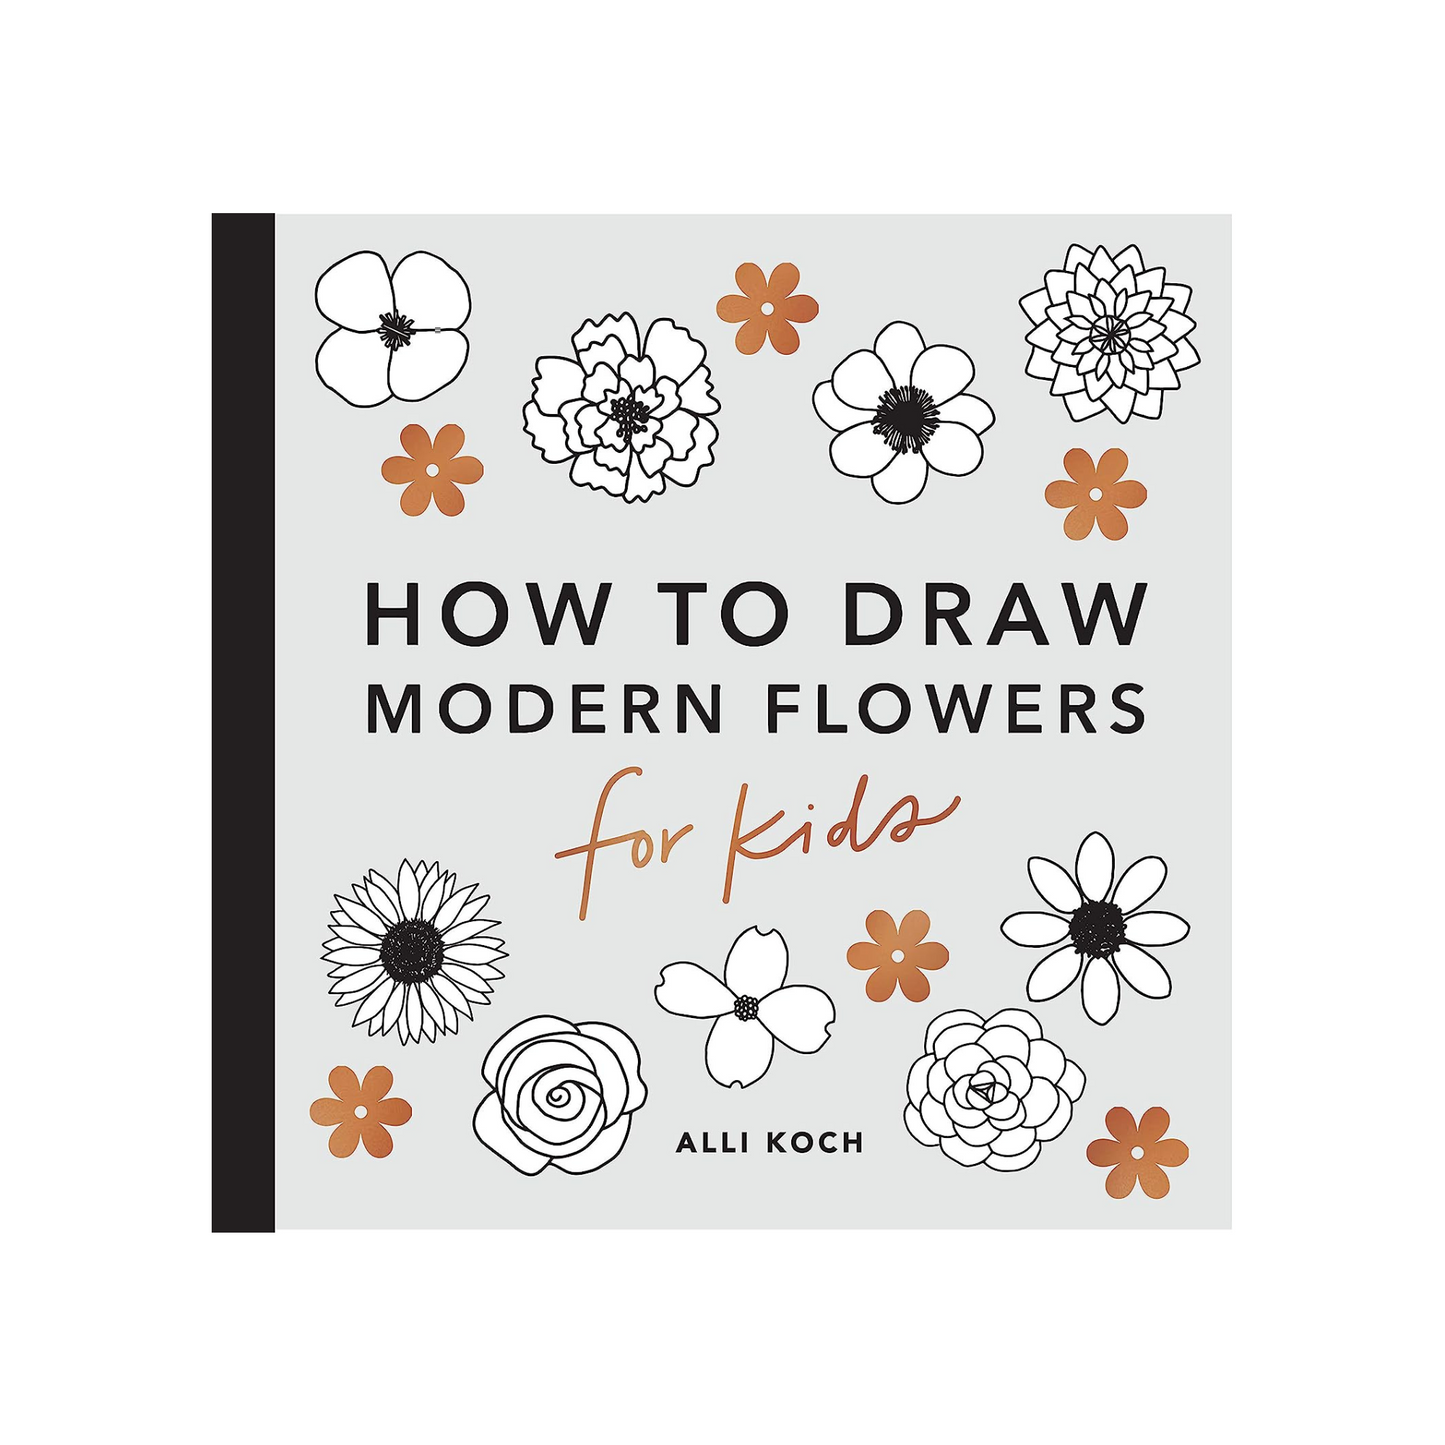 How to Draw Modern Flowers: For Kids